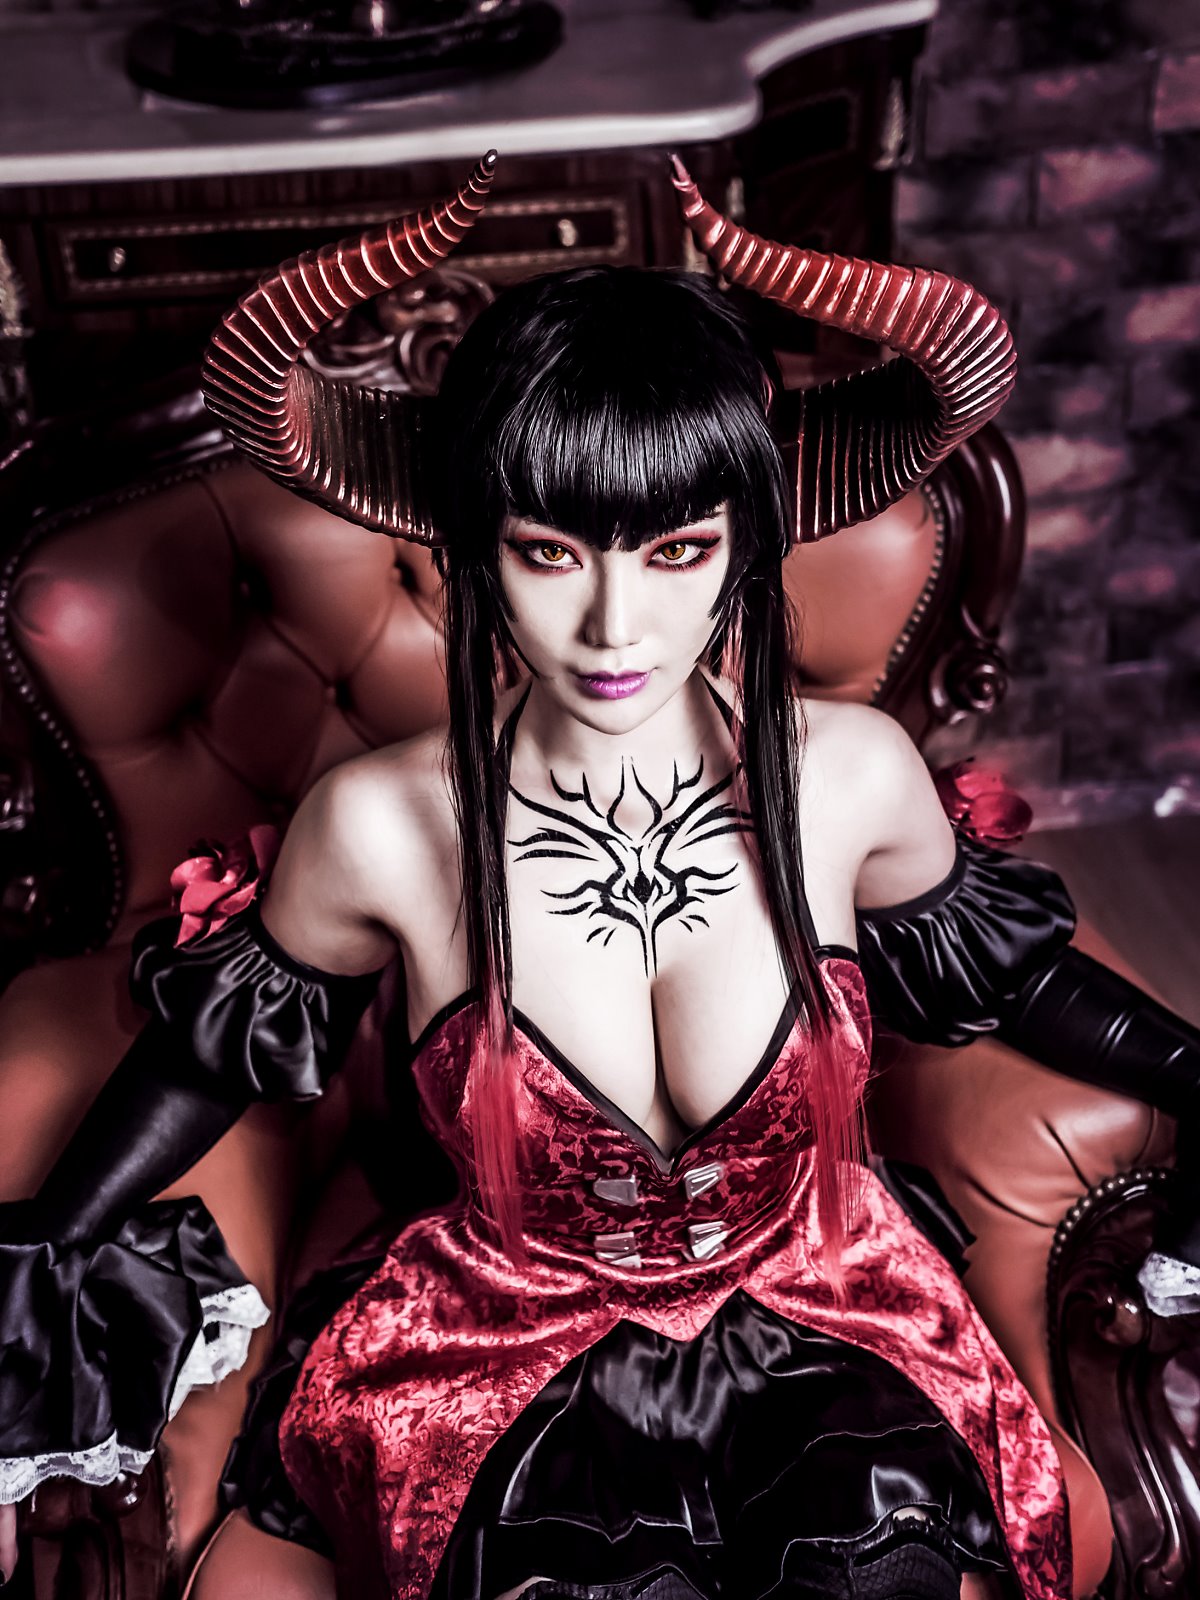 Too perfect for an Eliza - Tekken 7 version cosPlay, this chest is unmistakable! - Photo 10.